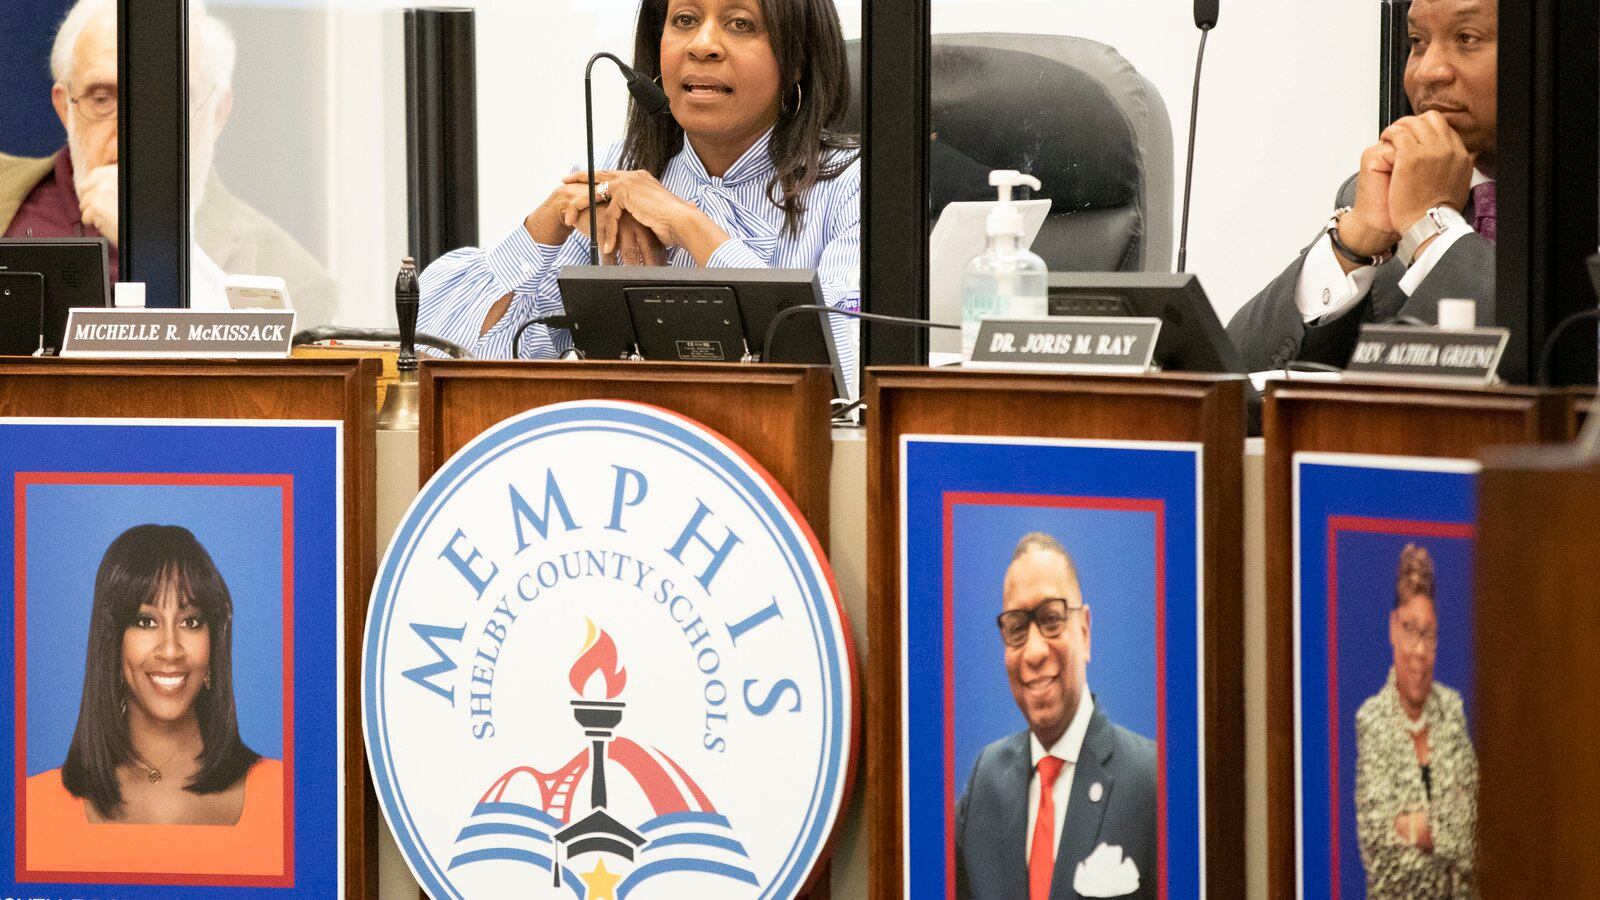 A woman sitting at a dais speaks into a microphone above a sign reading “Memphis Shelby County Schools”